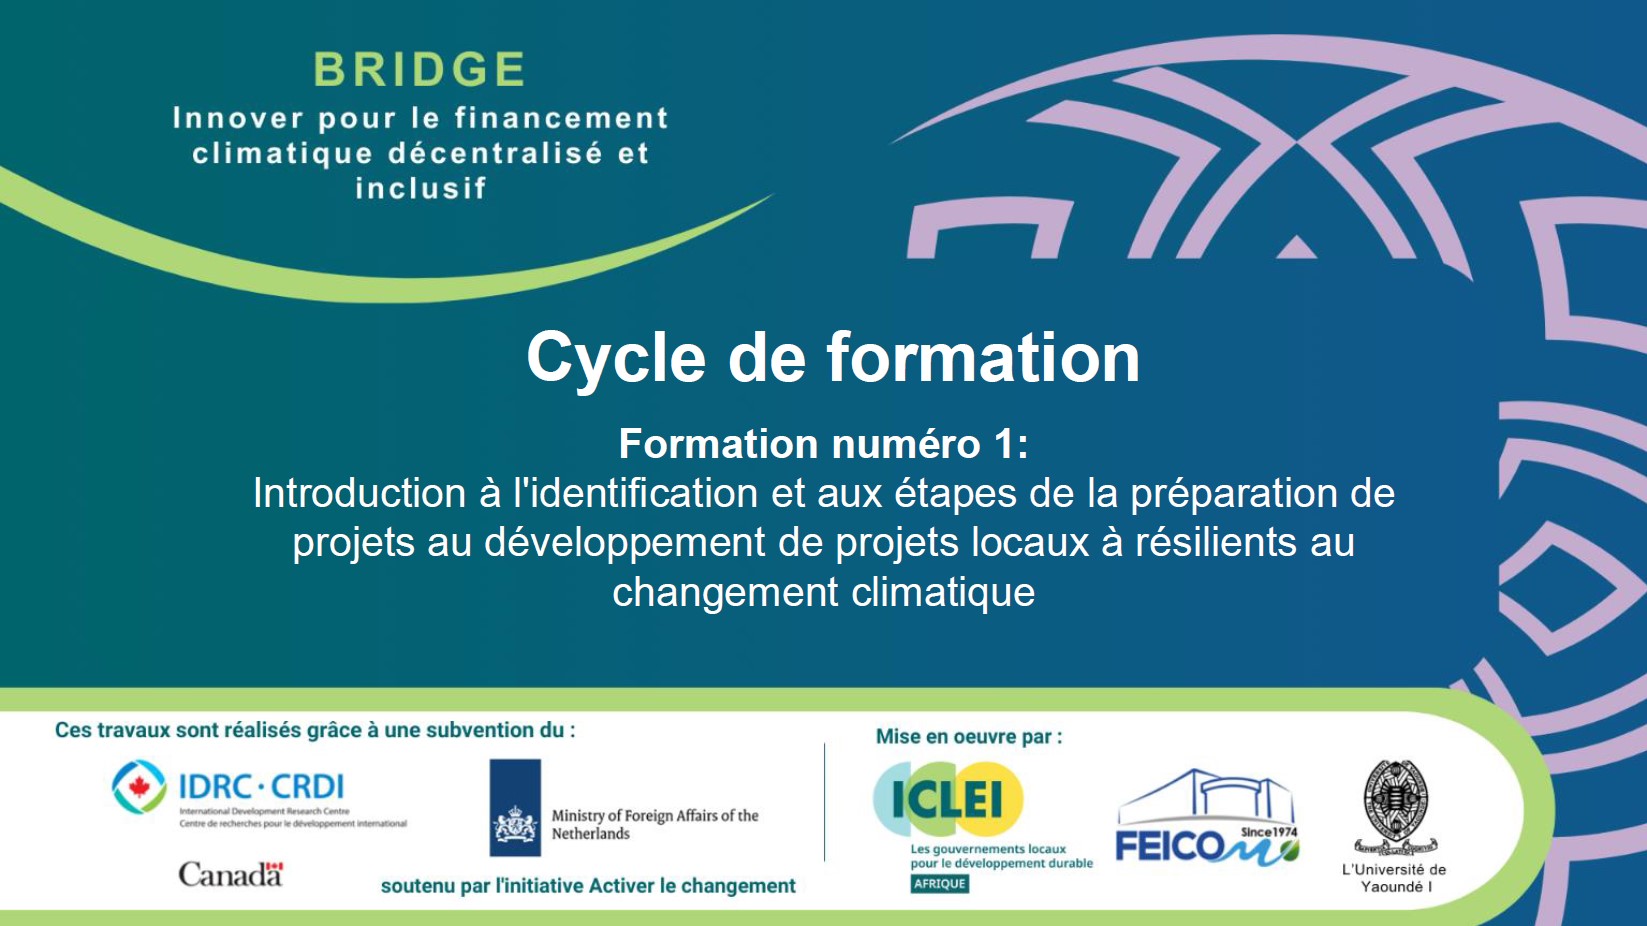 Introduction to the identification and stages of project preparation for the development of local projects resilient to climate change